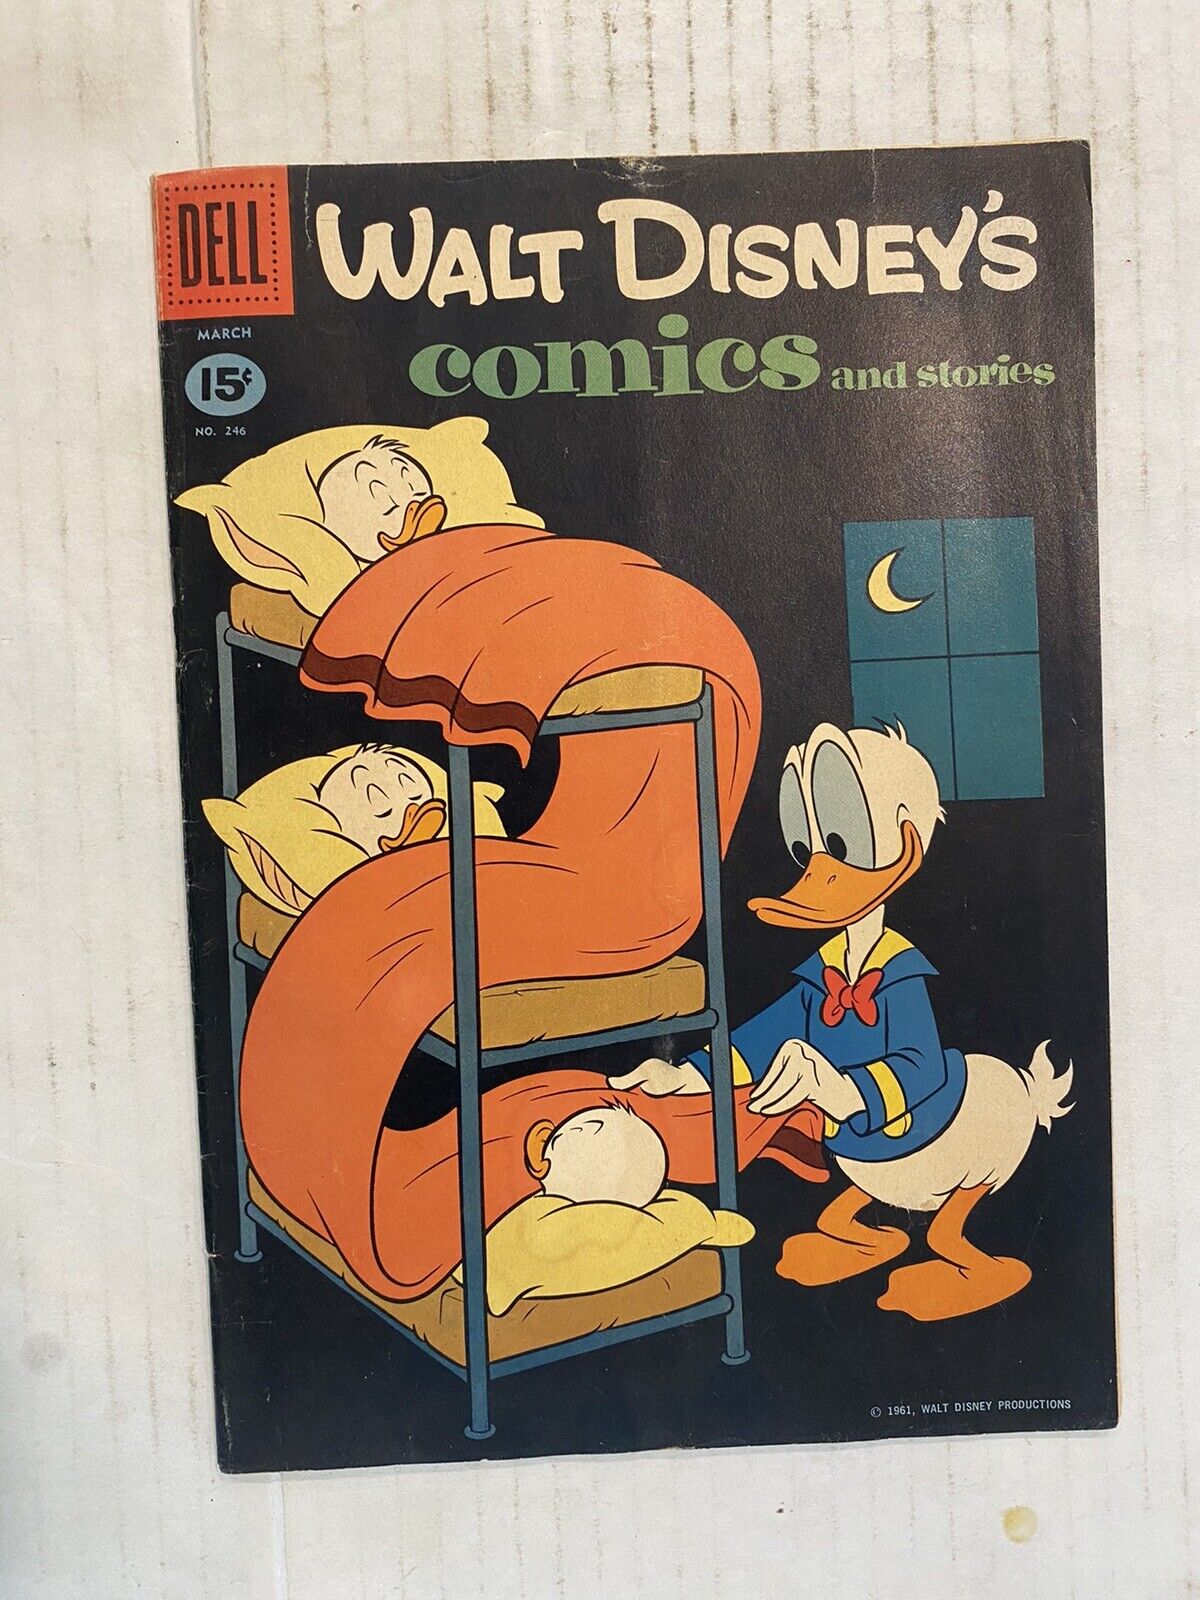 WALT DISNEY'S COMICS AND STORIES #246 DELL CARL BARKS MARCH 1961 Donald Duck